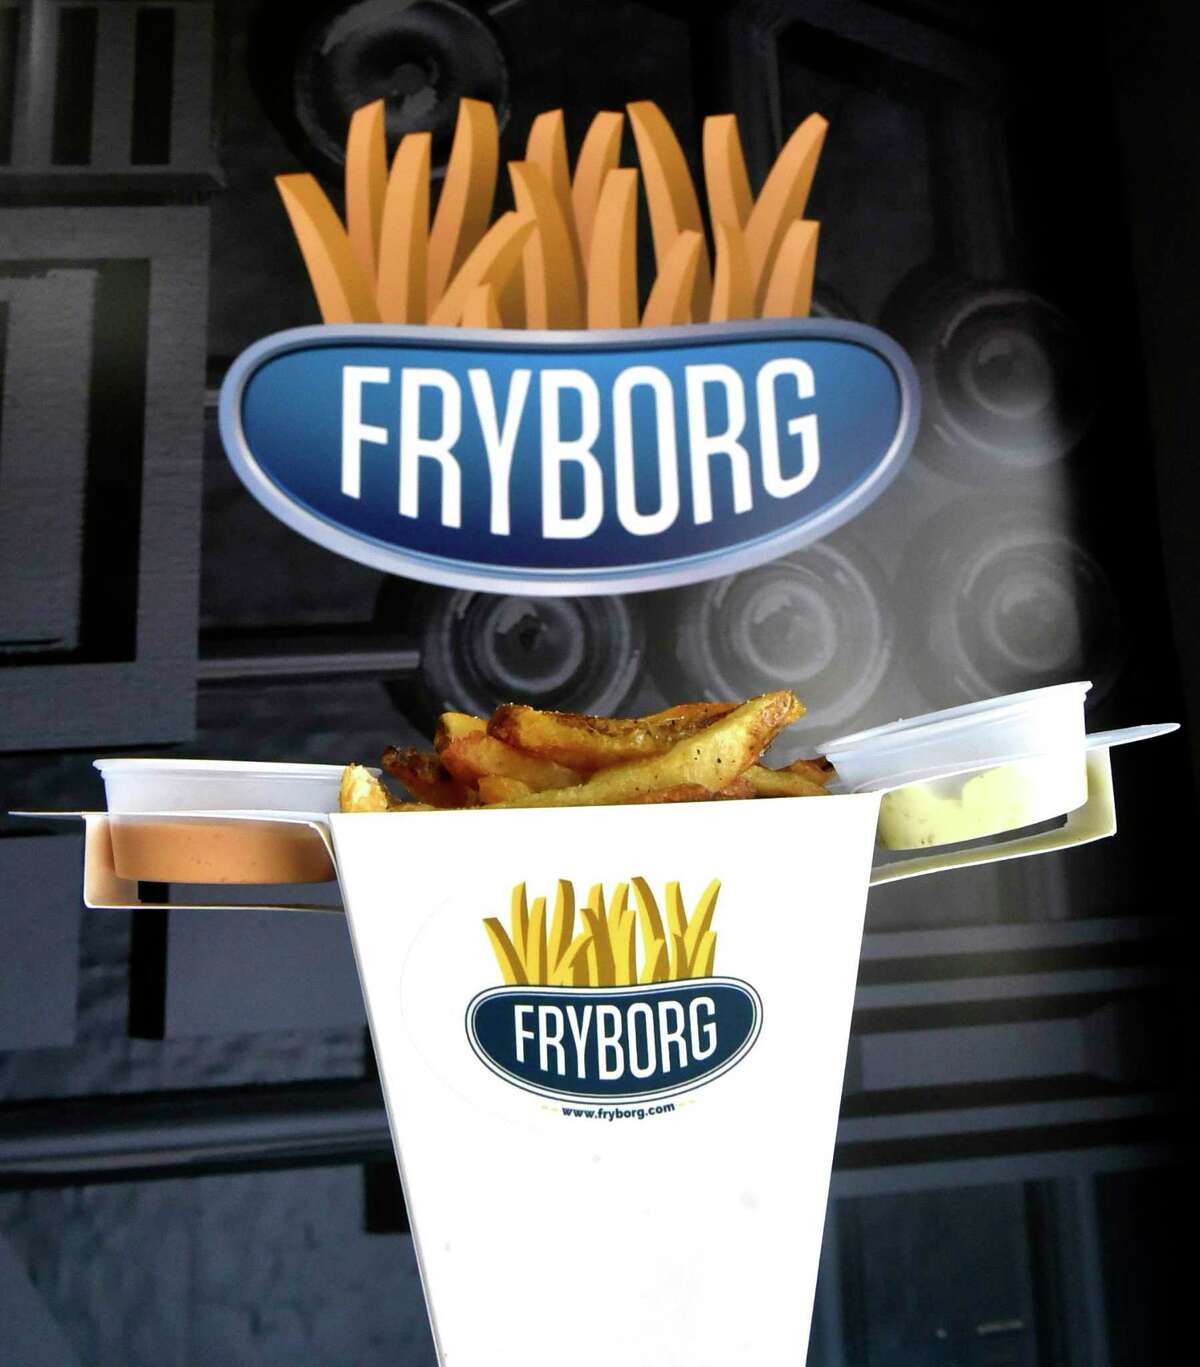 A serving of french fries with dipping sauces at Fryborg in Milford, an eclectic eatery featuring hand-cut french fries as the main attraction with variation of flavorings and dipping sauces on a menu that also includes sandwiches.